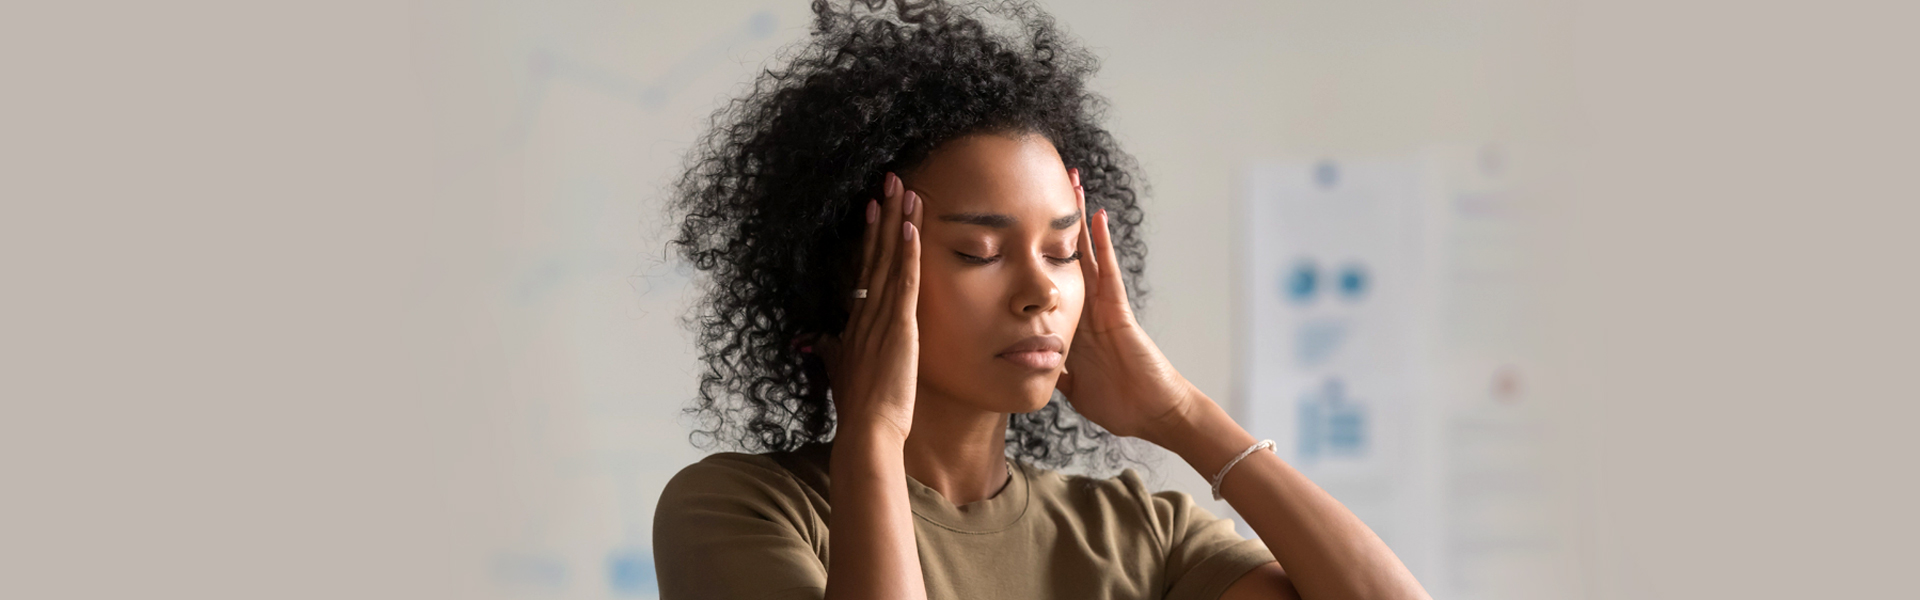 Stages, Symptoms, Risk Factors and Treatment for Migraines